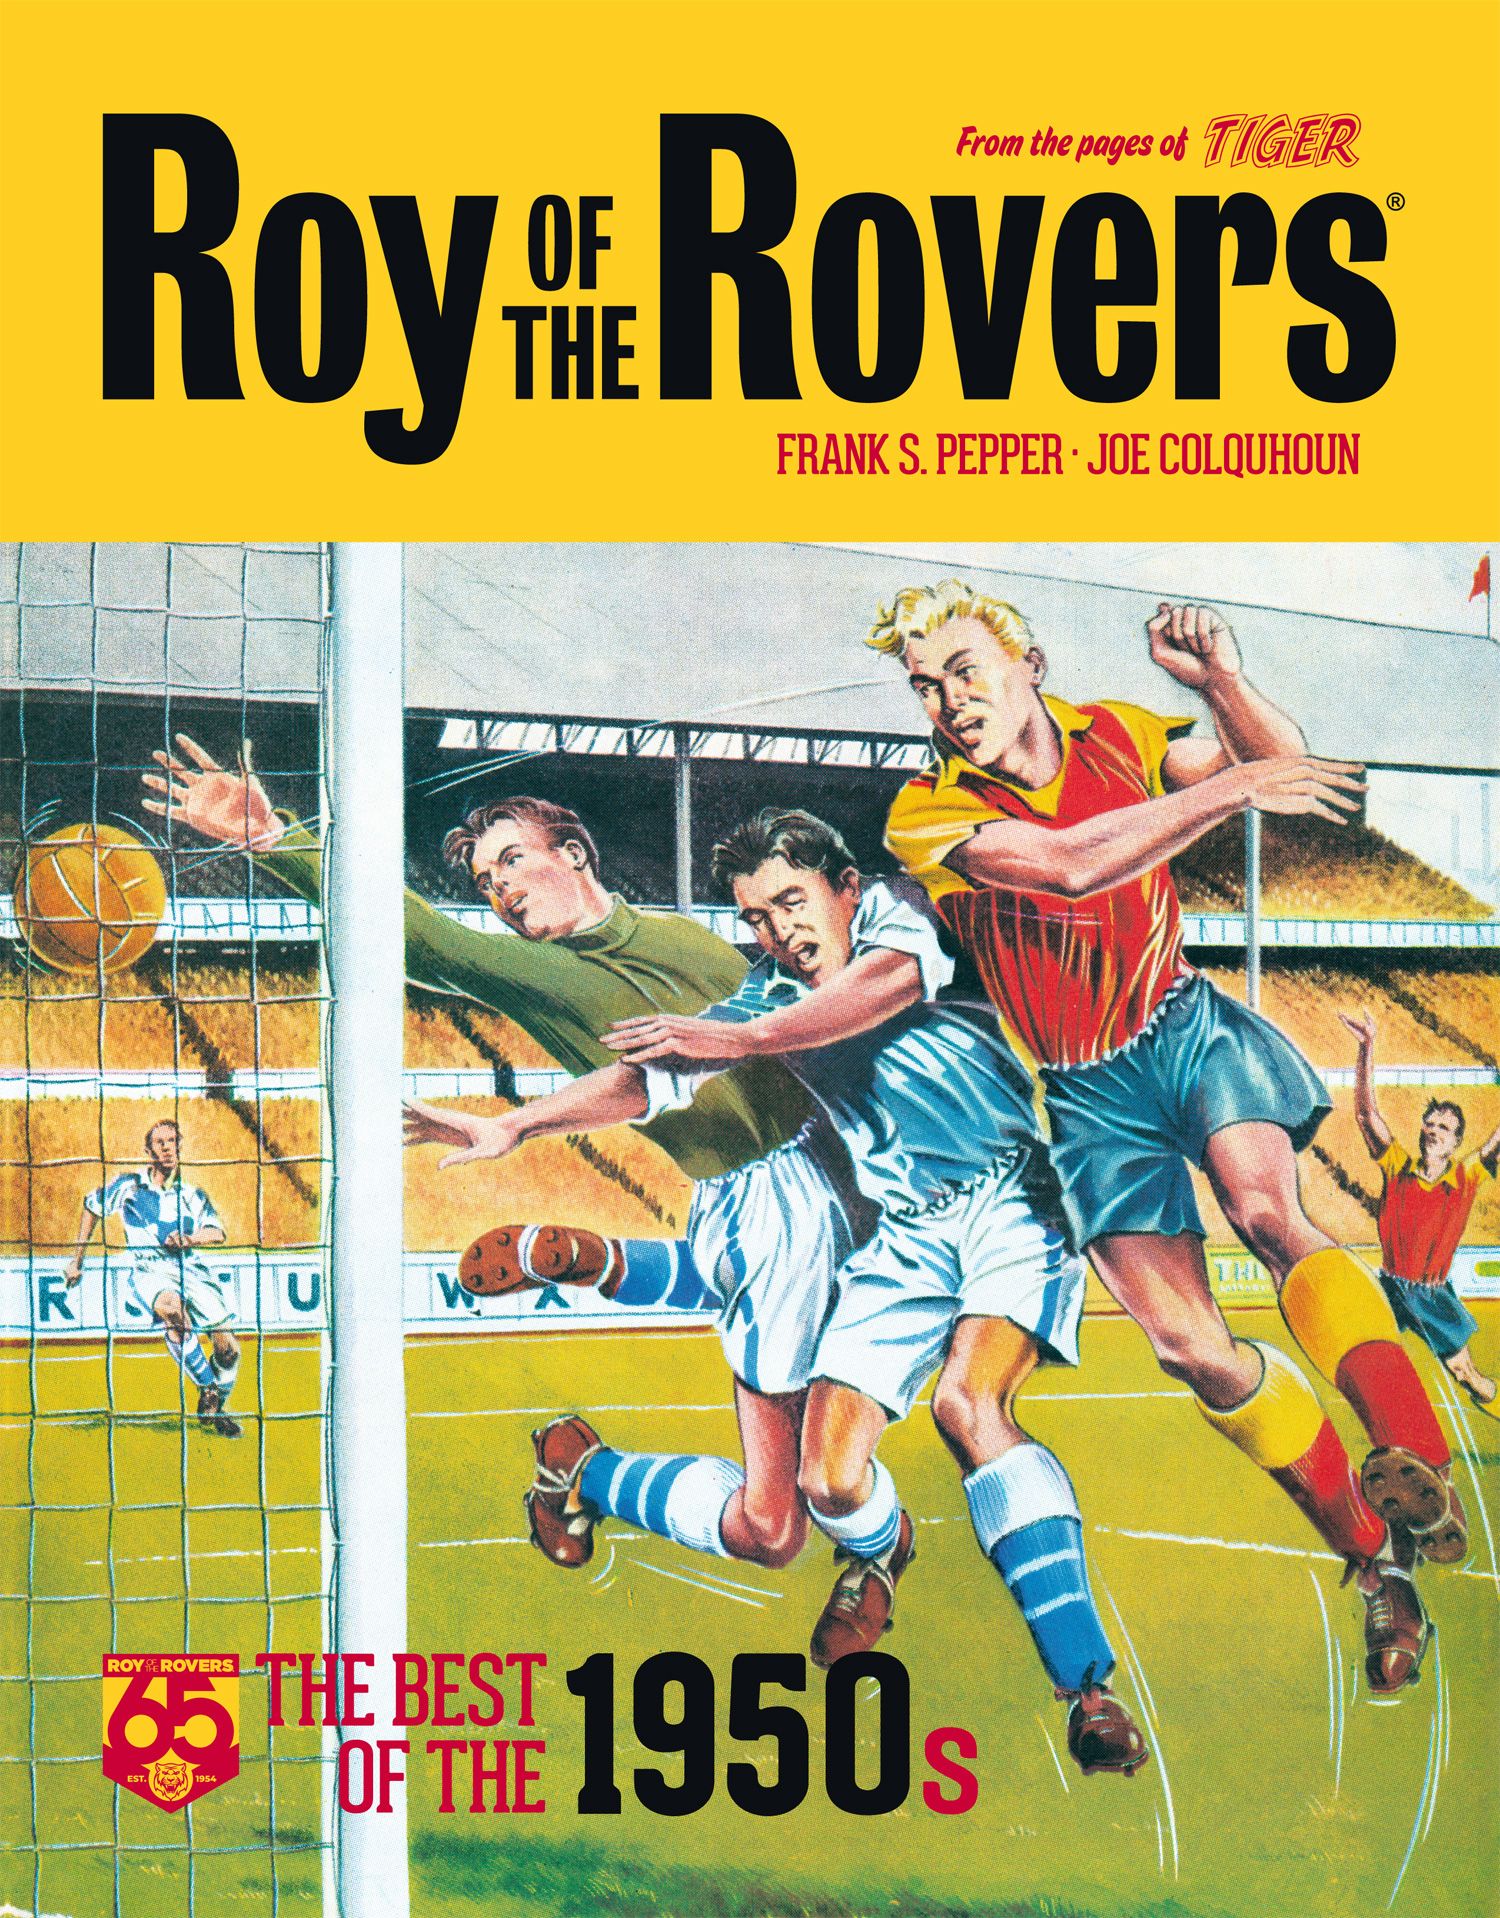 OUT NOW: Roy of the Rovers – The Best of the 1950s